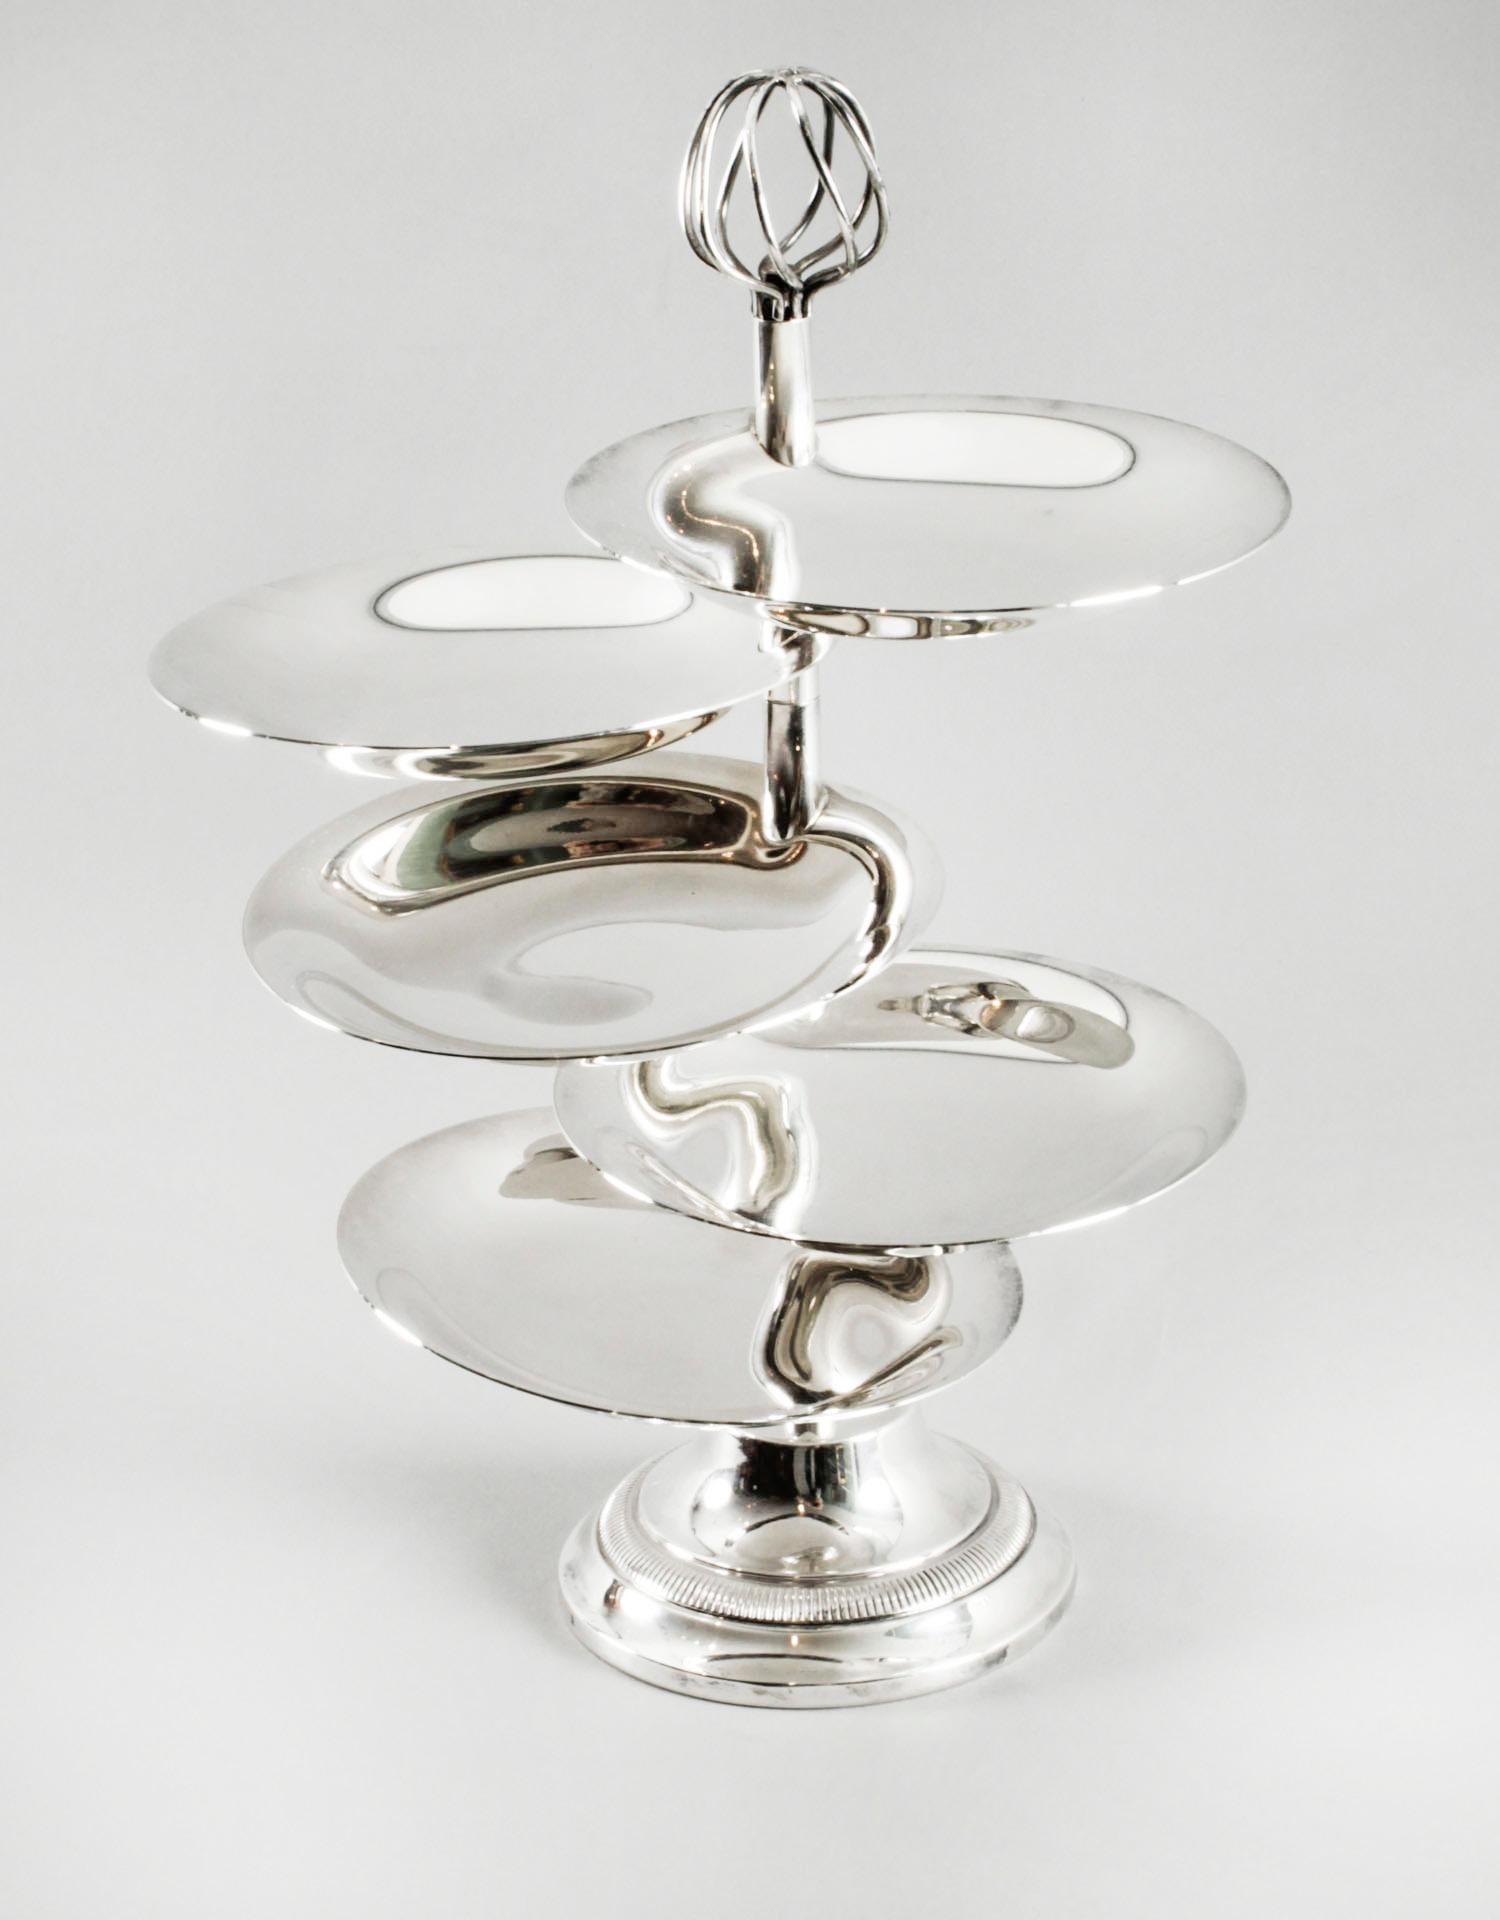 Vintage Silver Plated Hors d'oeuvres Stand by Christofle 20th C For Sale 8